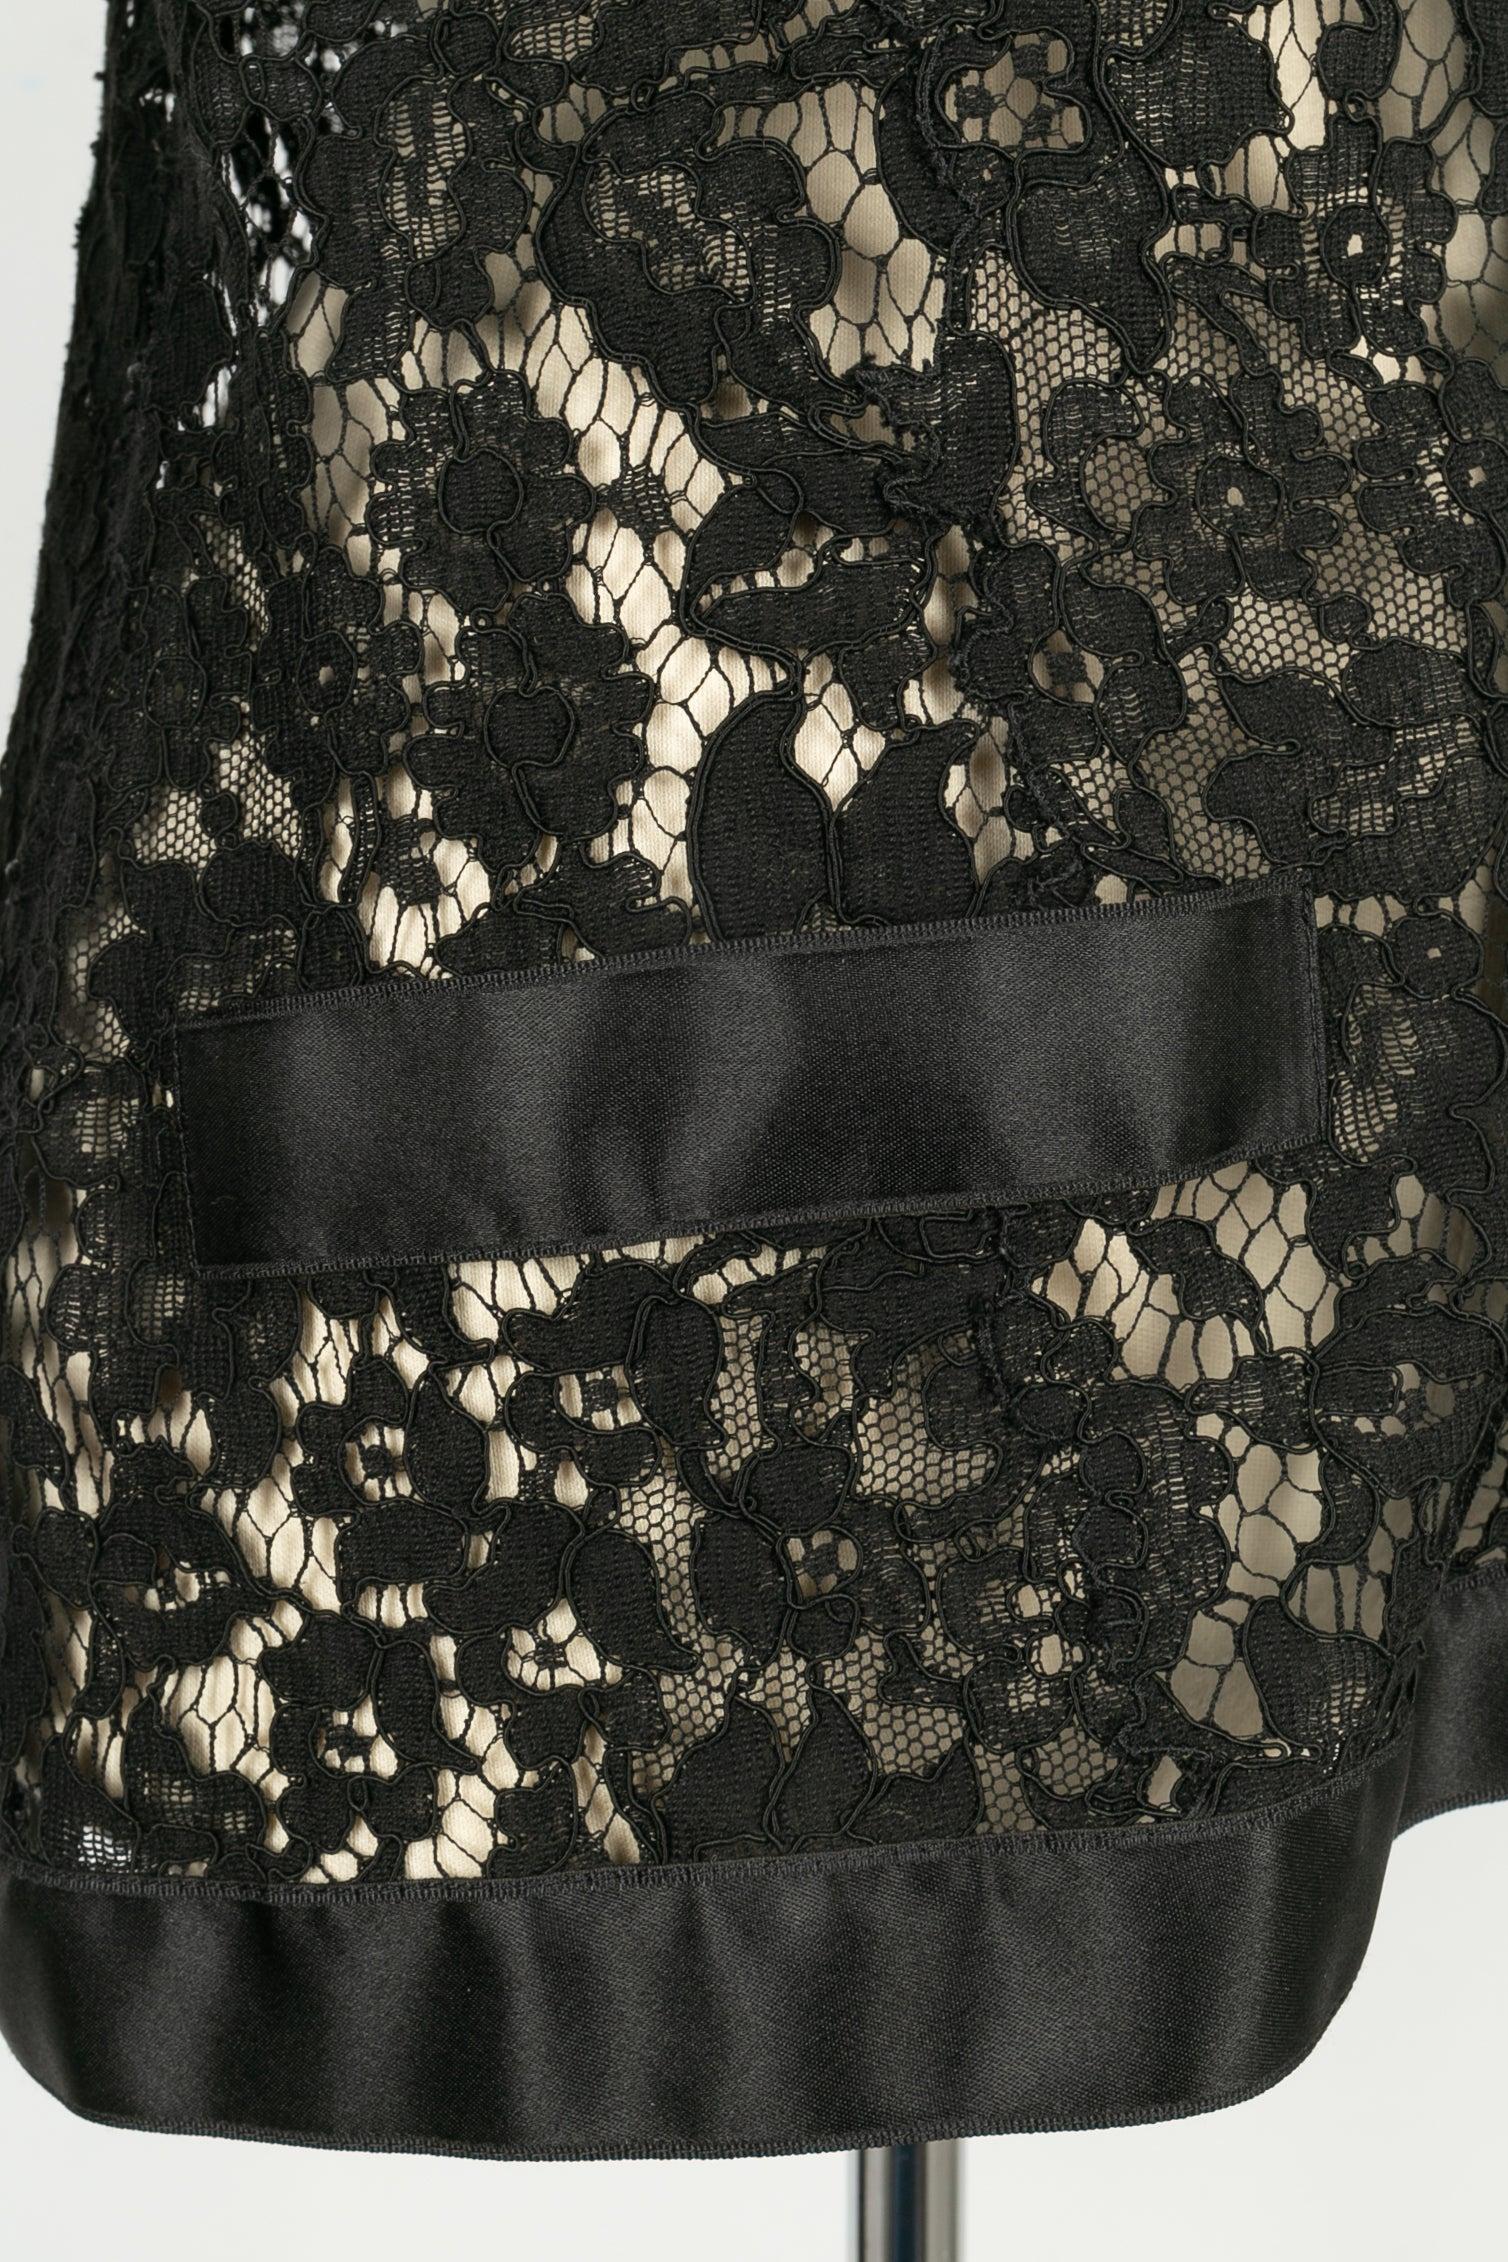 Chanel Black Lace and Silk Set For Sale 7